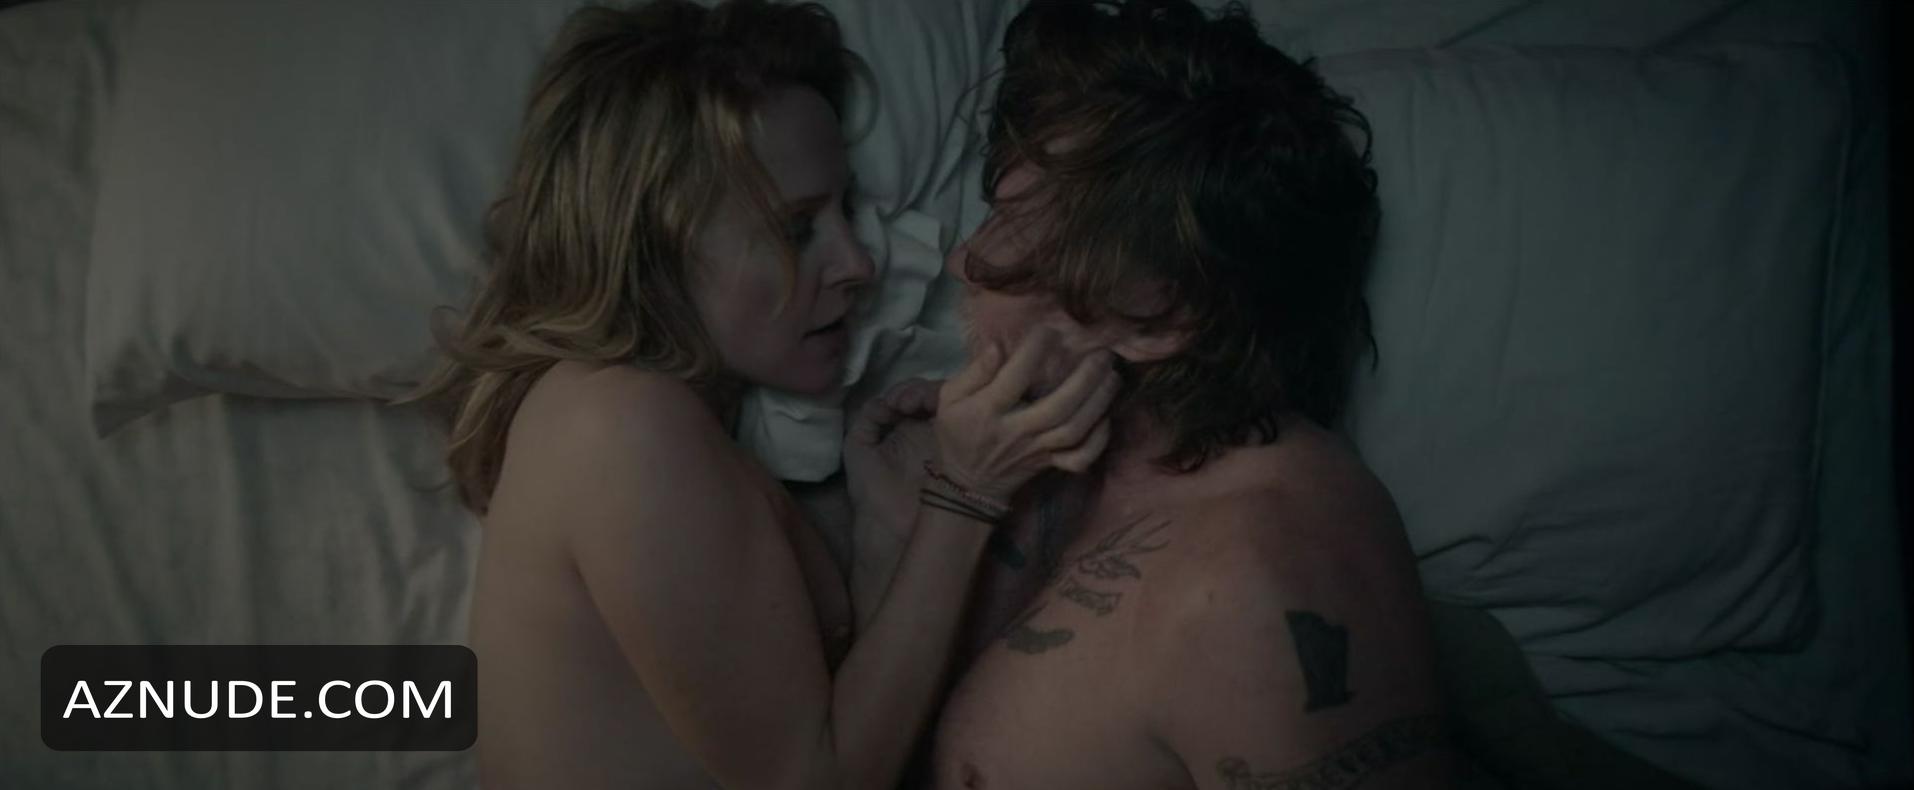 Amy hargreaves sex scenes